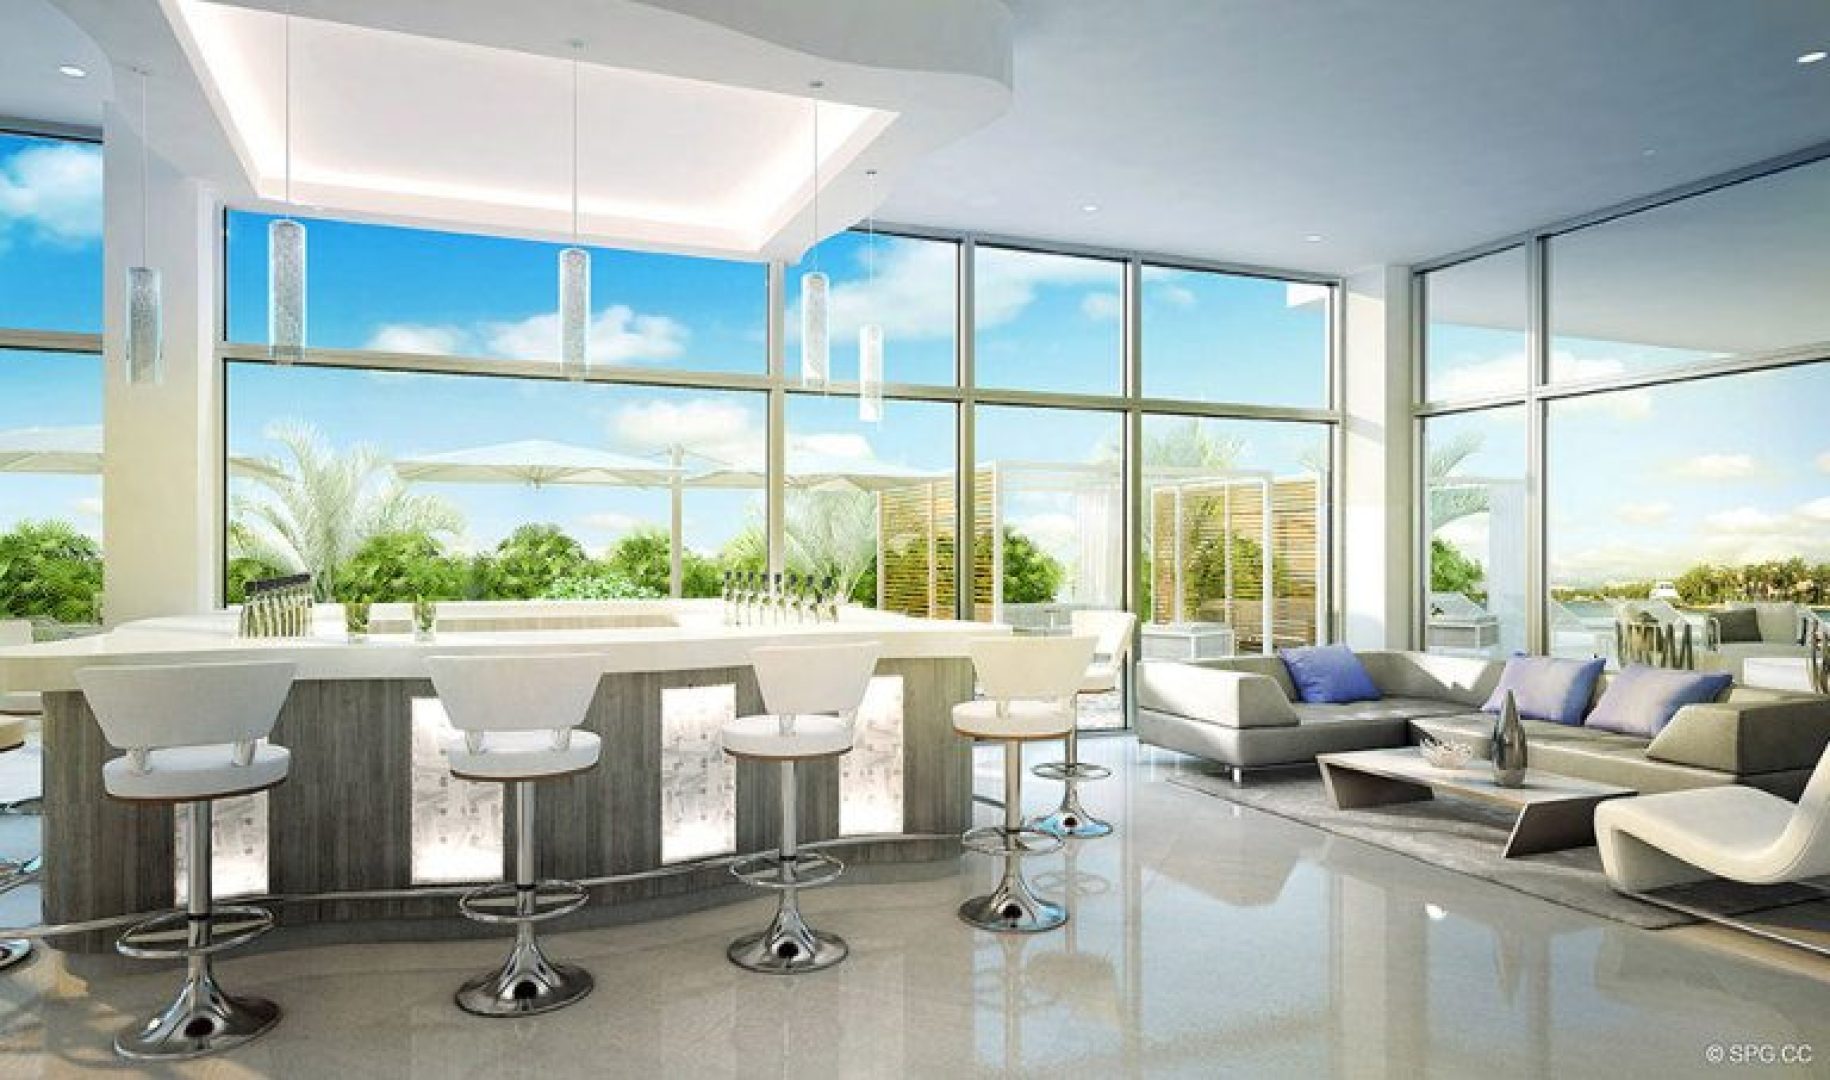 The Bar and Lounge Room in 321 at Water's Edge, Luxury Waterfront Condos in Fort Lauderdale, Florida 33304